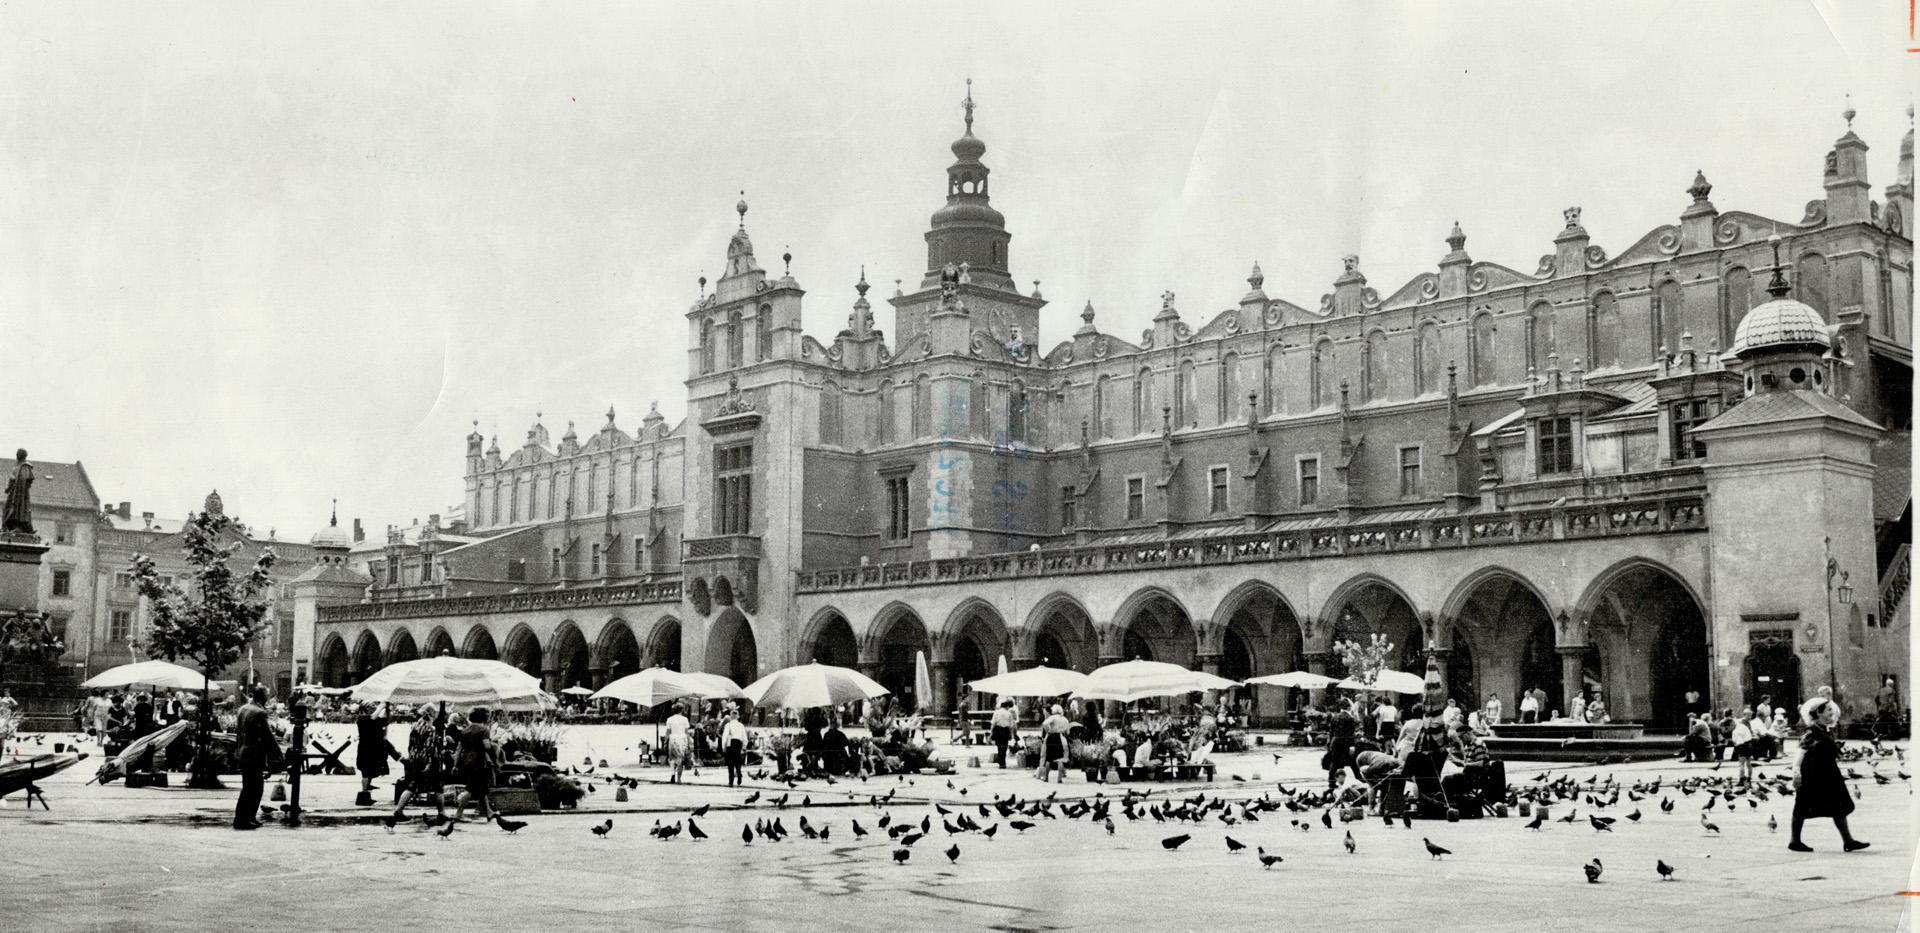 The magnificent 14th century city hall of Cracow, now a shopping arcade, dominates Market Square in an area of the city described as a masterpiece of medieval art